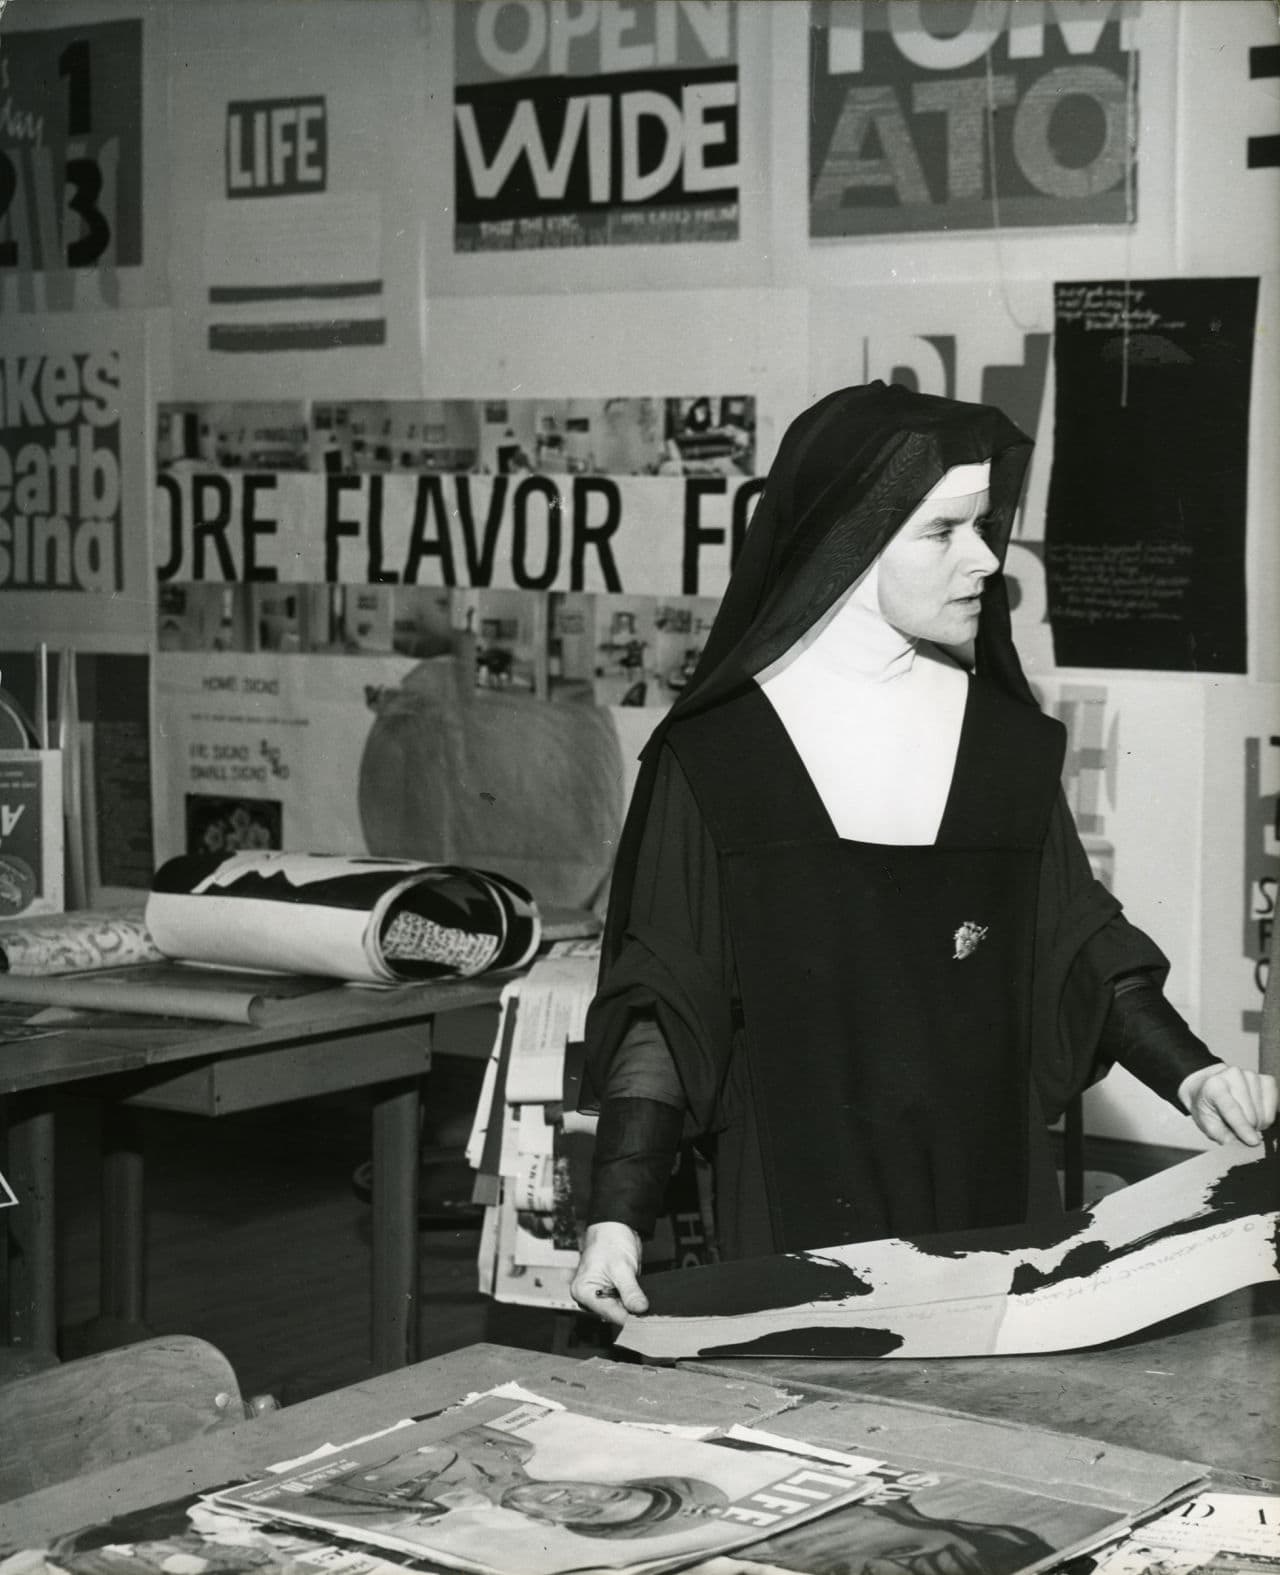 Corita Kent teaching with LIFE Magazine, photographed by Mary Anne Karia in 1965. (Courtesy Mary Anne Karia)